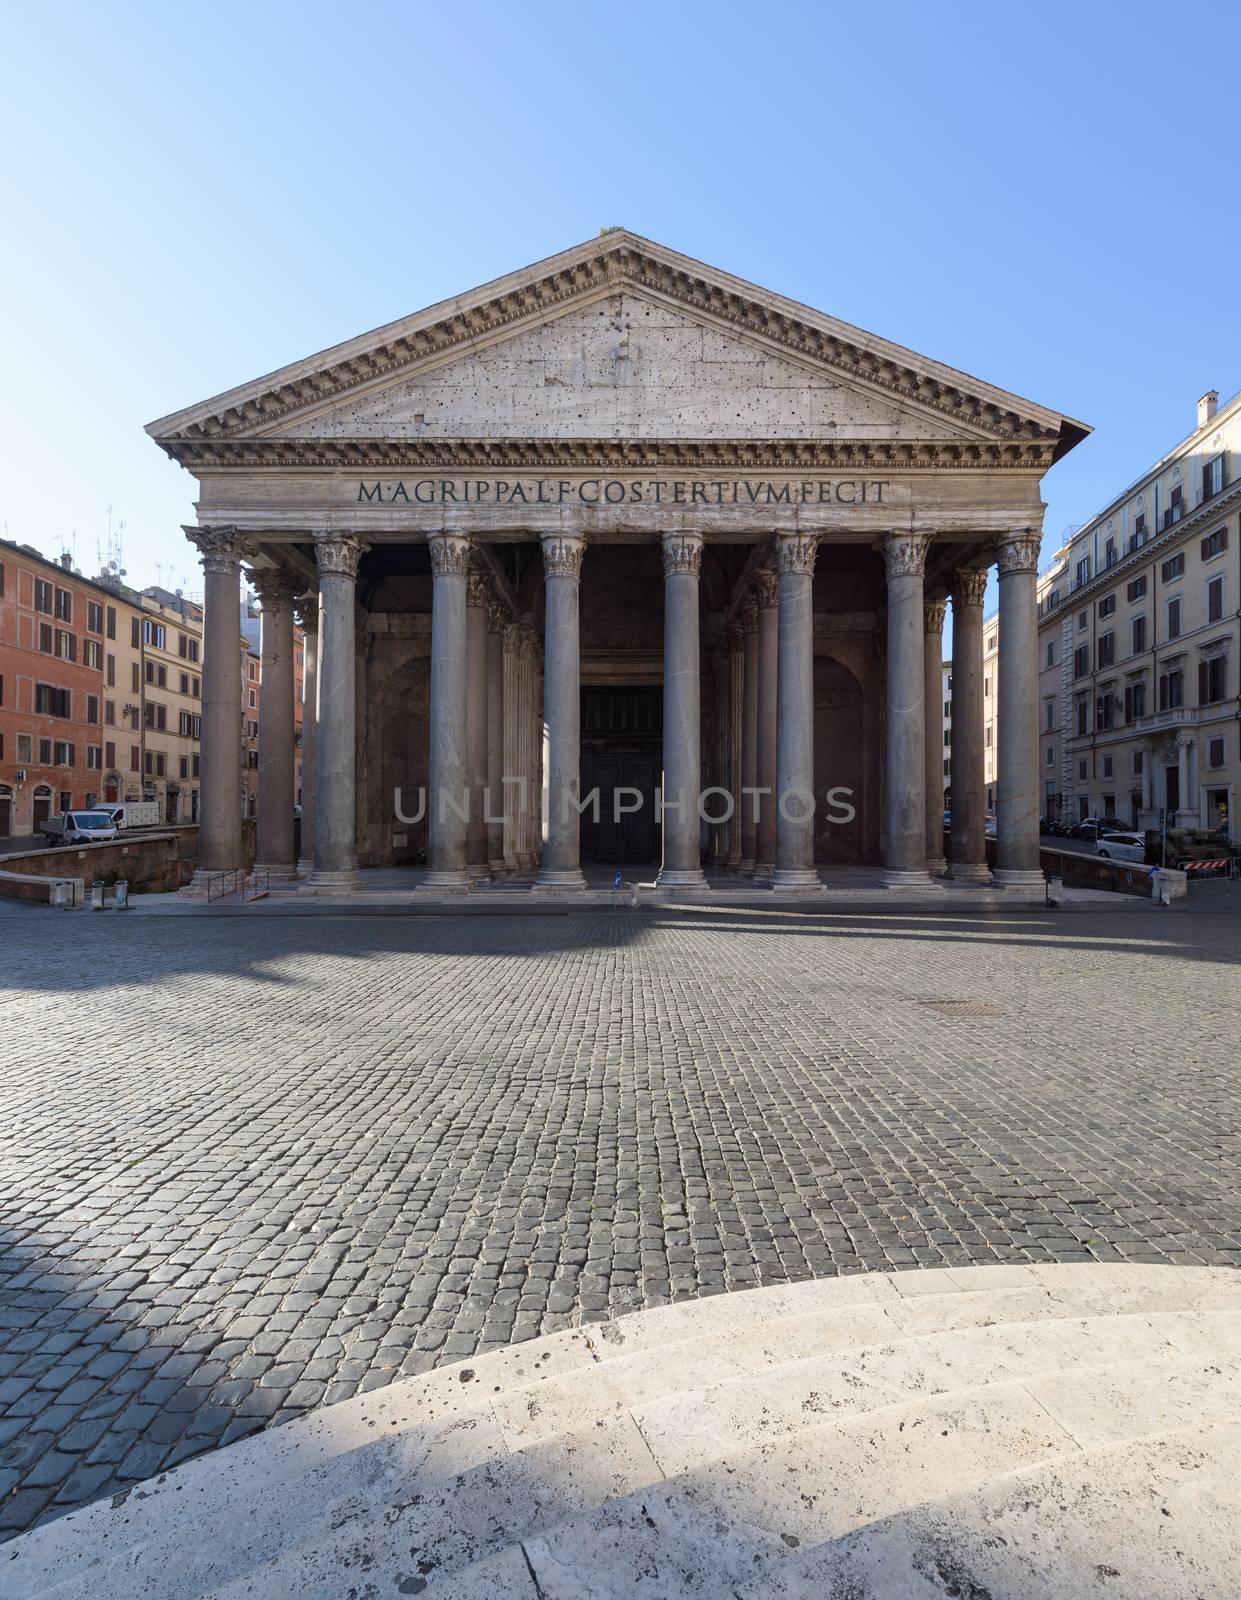 Rome, Italy - 10 March 2020: Empty squares in front of the Pantheon Roman temple, Rome, Italy. The government decreed a nationwide quarantine, with gatherings bans, limited opening hours following the CoVid-19 epidemic